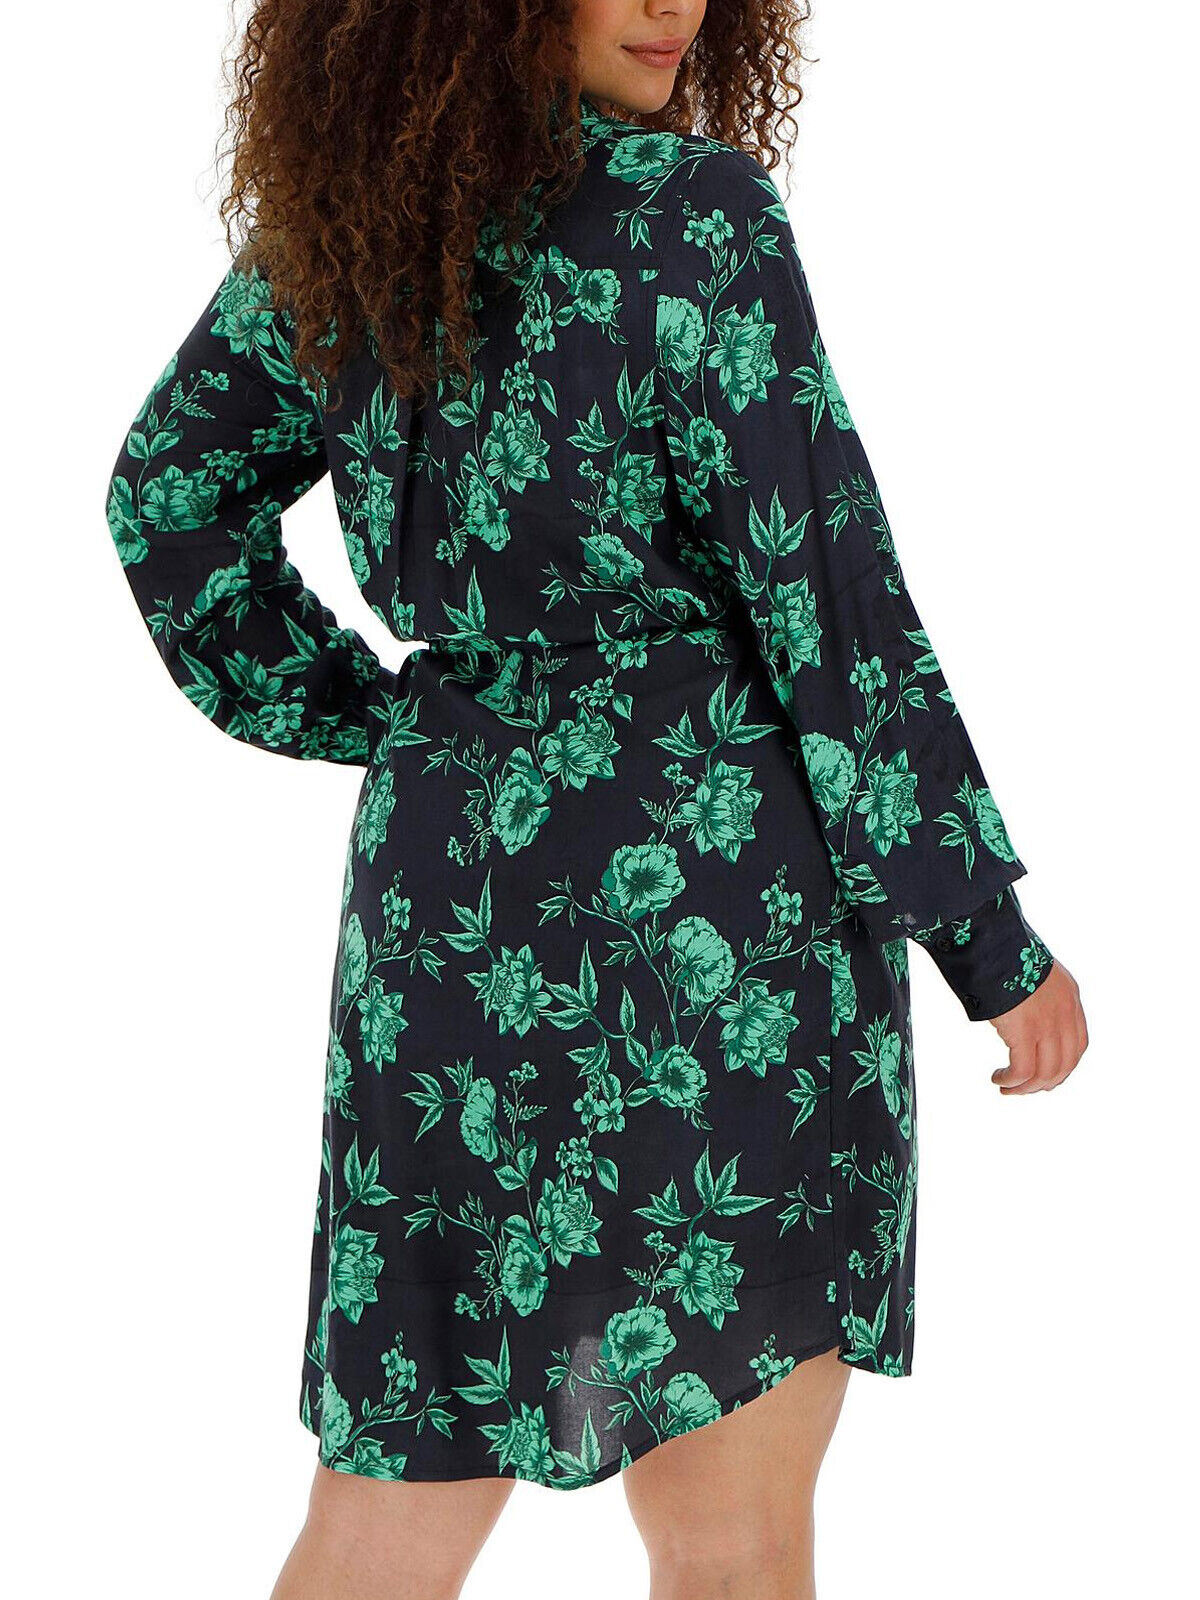 New Capsule Green Floral Print Shirt Dress in Size 16 NO TIE BELT